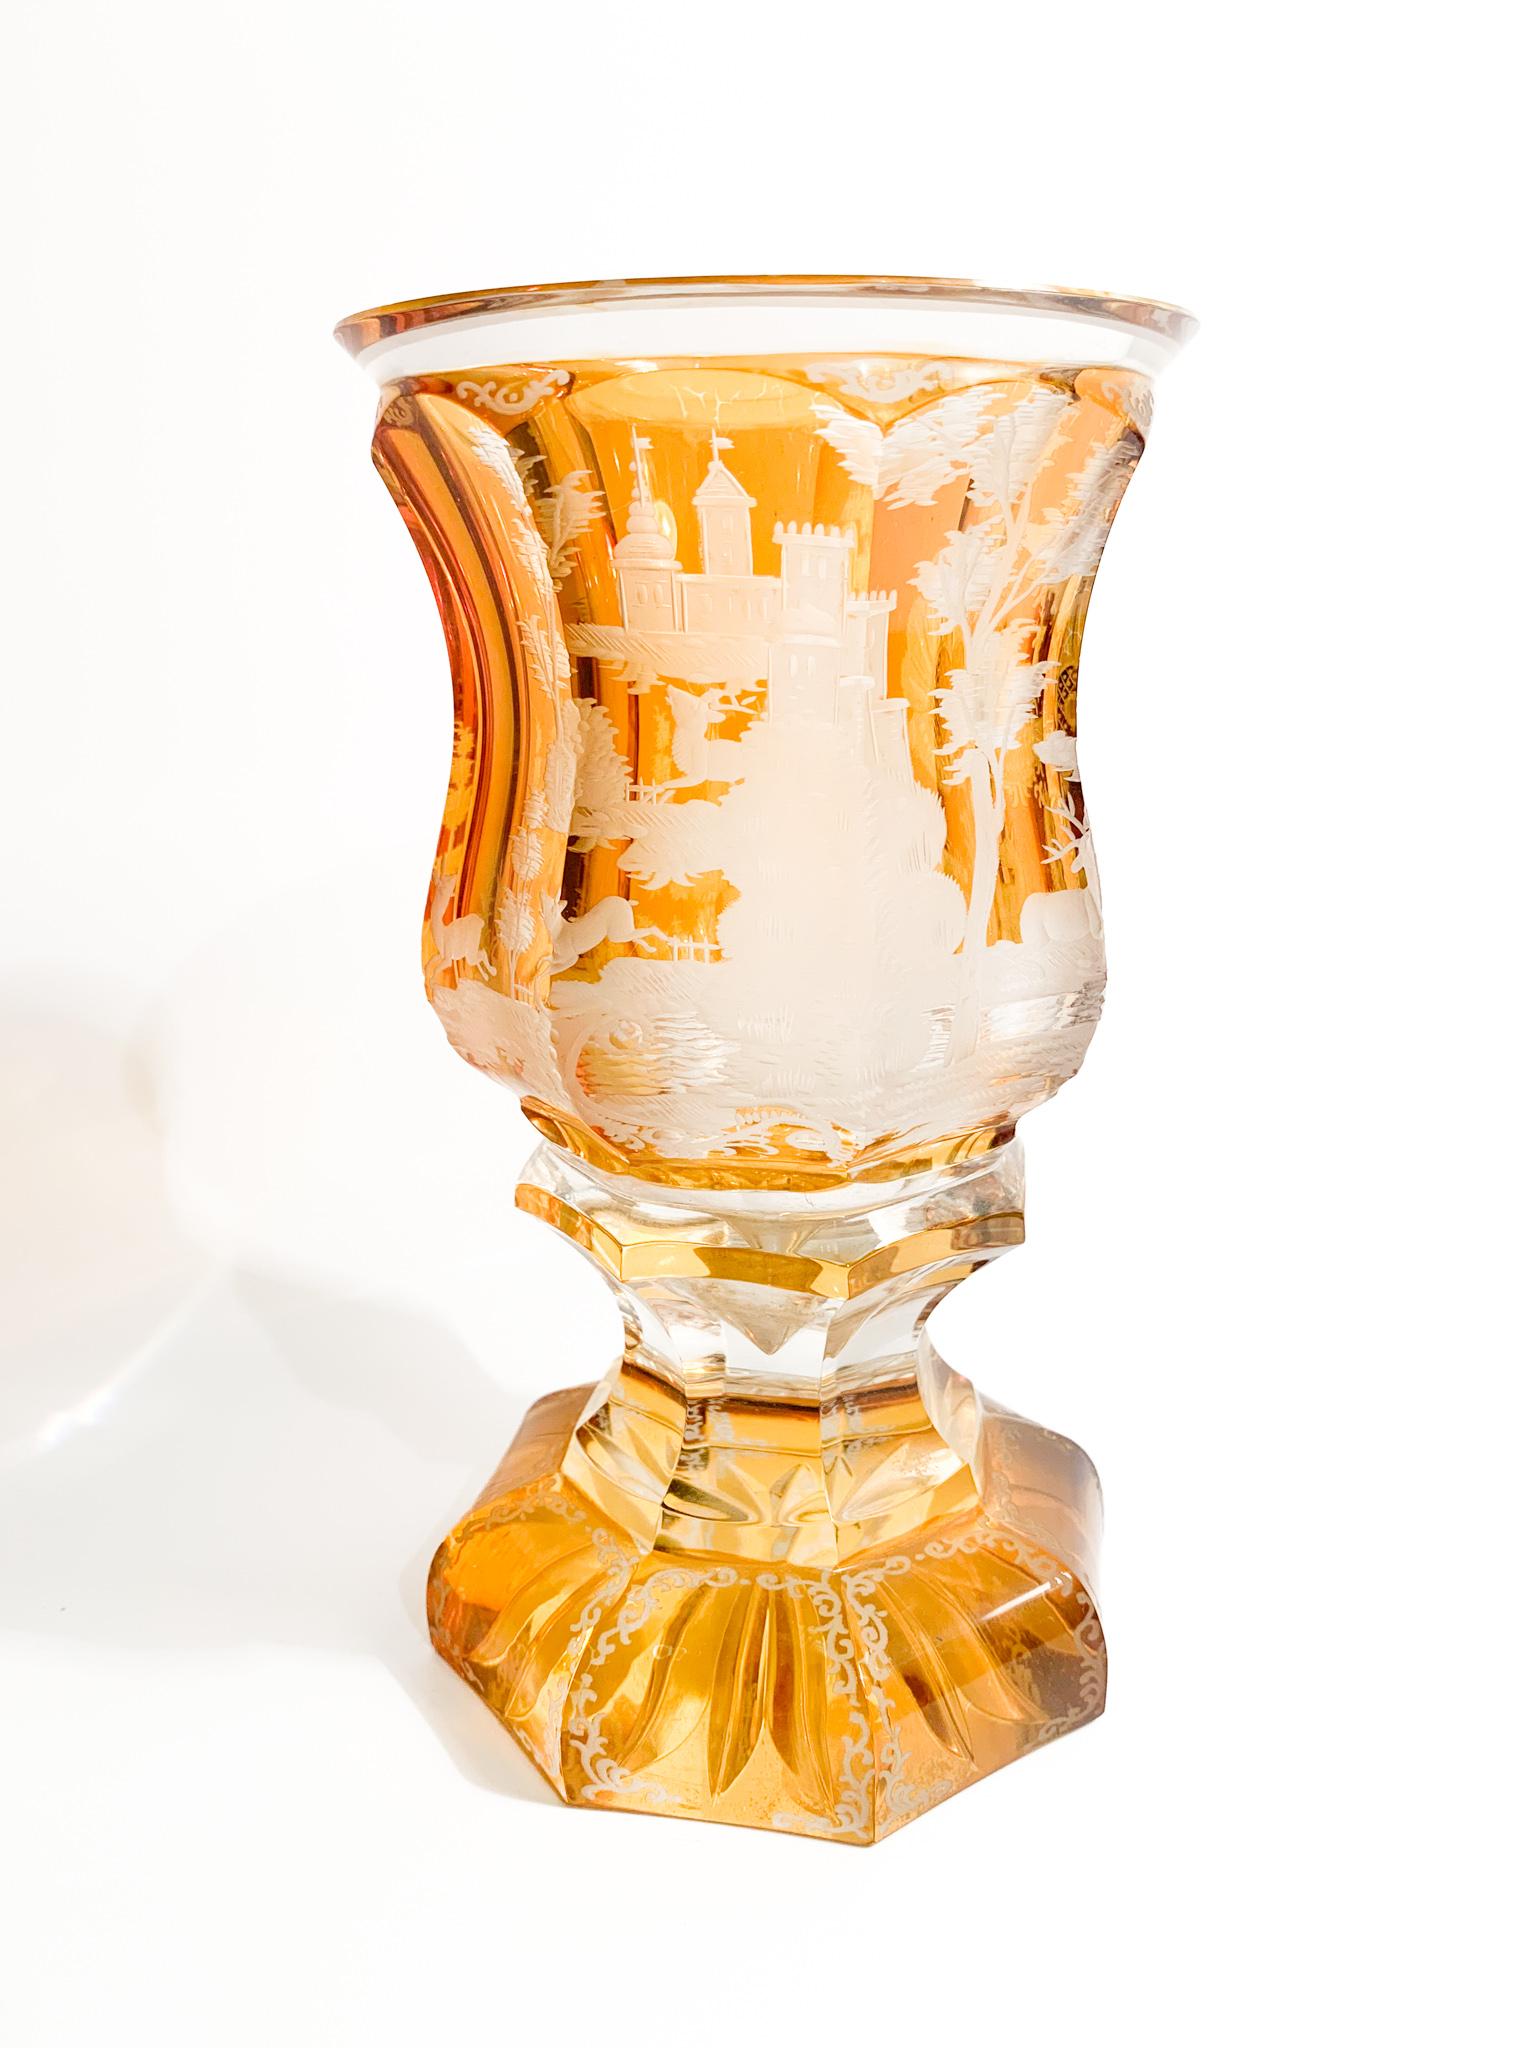 Late 19th Century Biedermeier Yellow Crystal Glass with Acid Decoration from the 19th Century